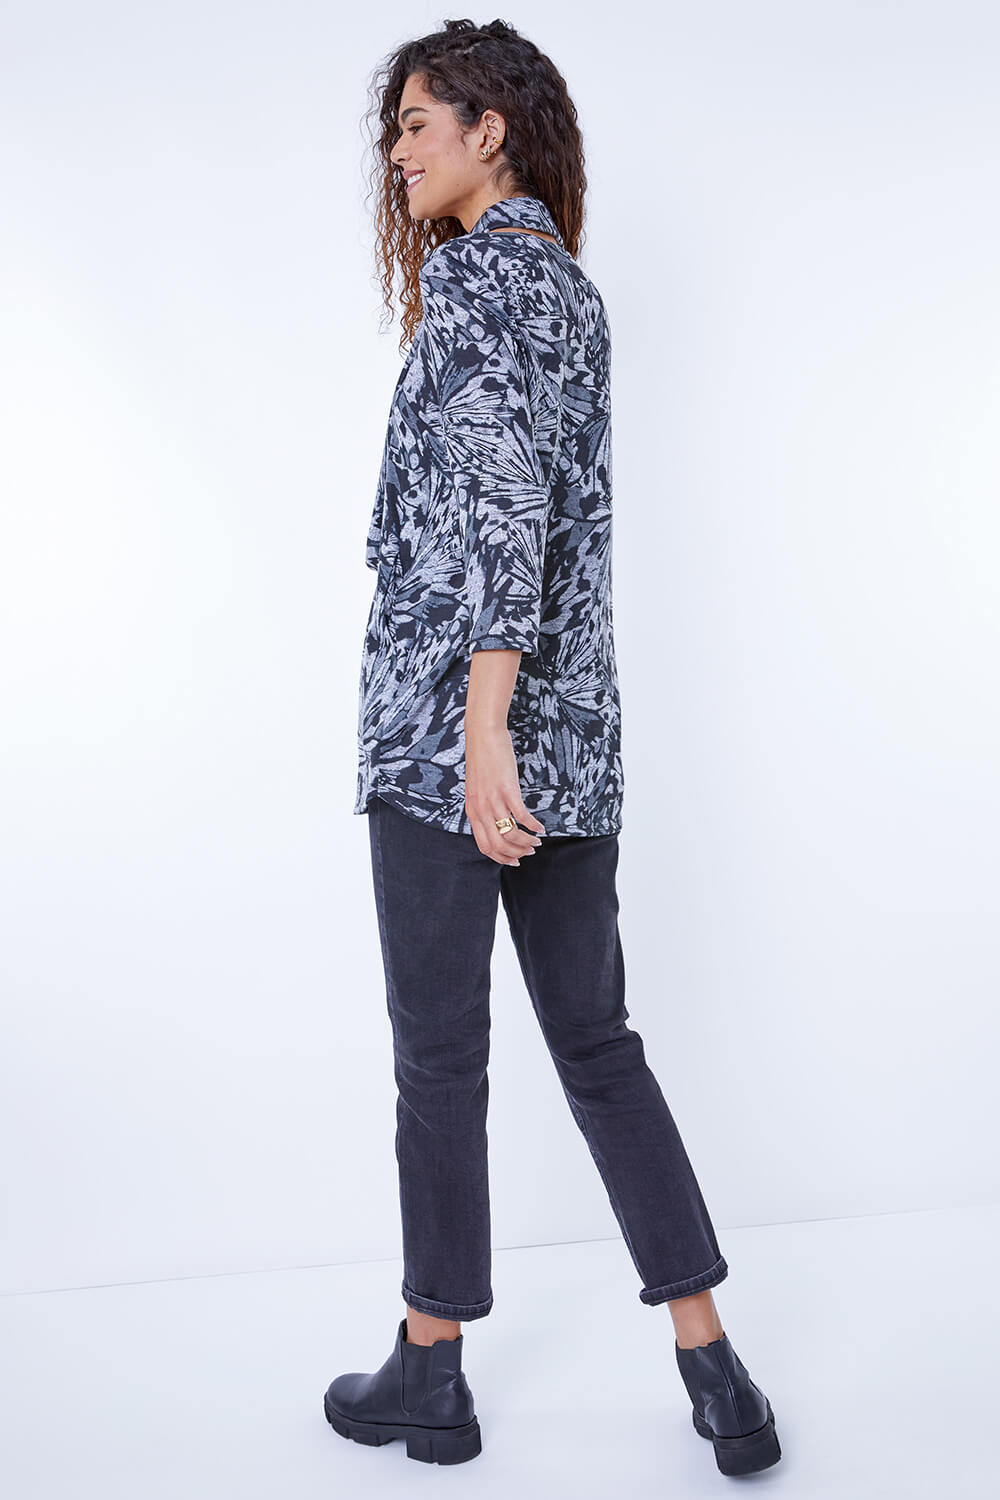 Black Butterfly Print Tunic Top With Snood, Image 3 of 5